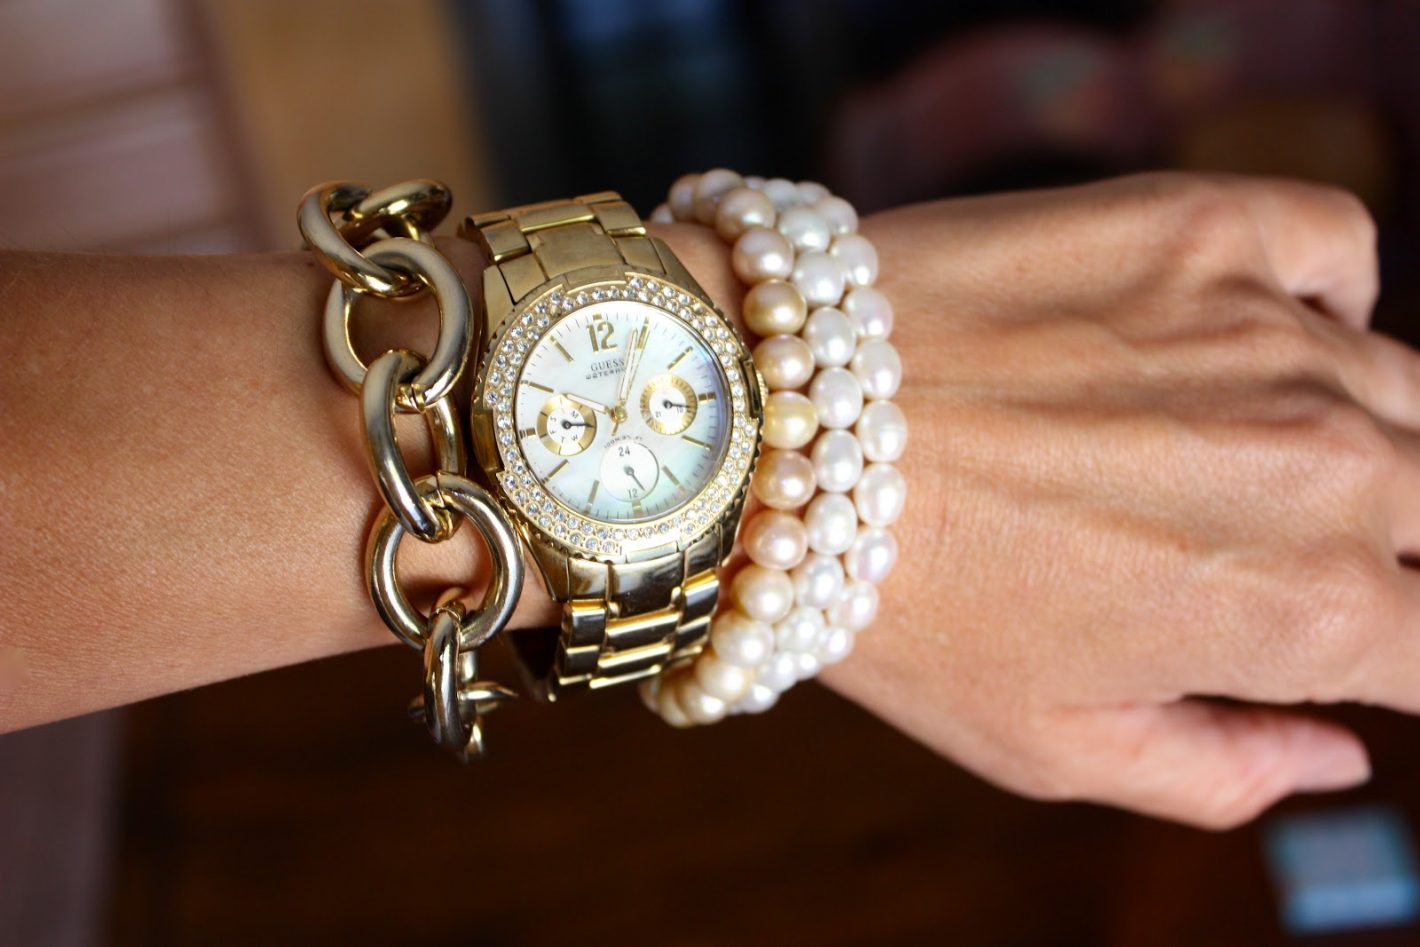 How To Wear Your Watch With Bracelets